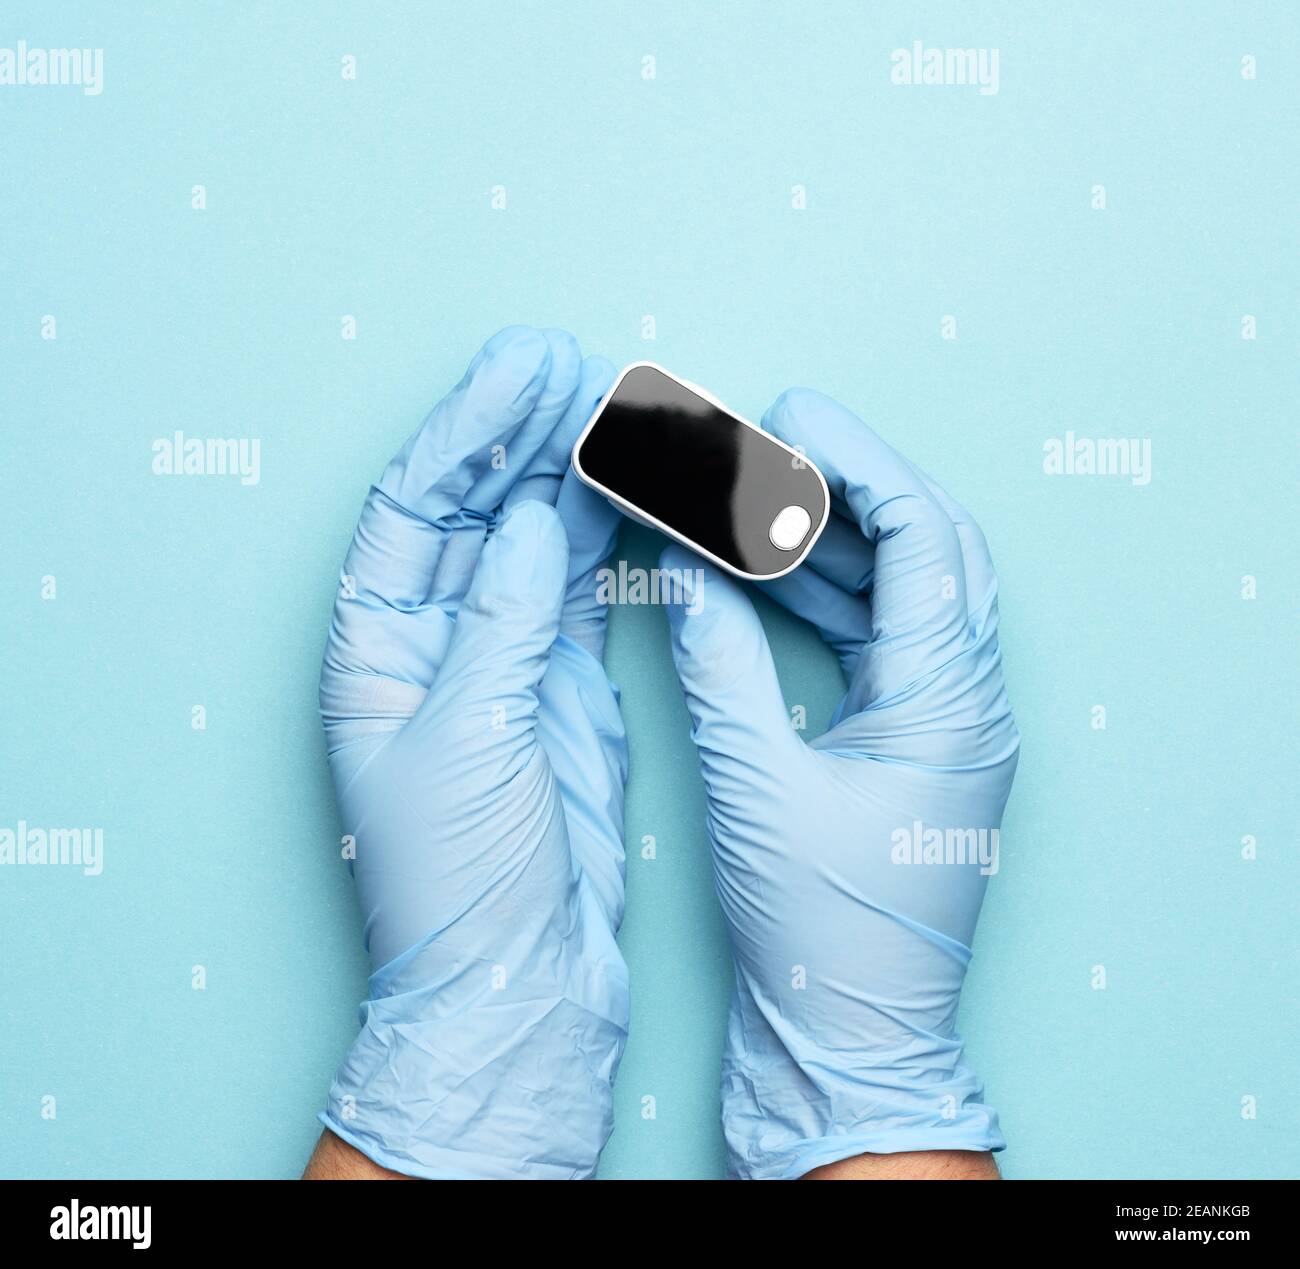 electronic pulse oximeter in the hands of a doctor, wearing blue latex gloves Stock Photo